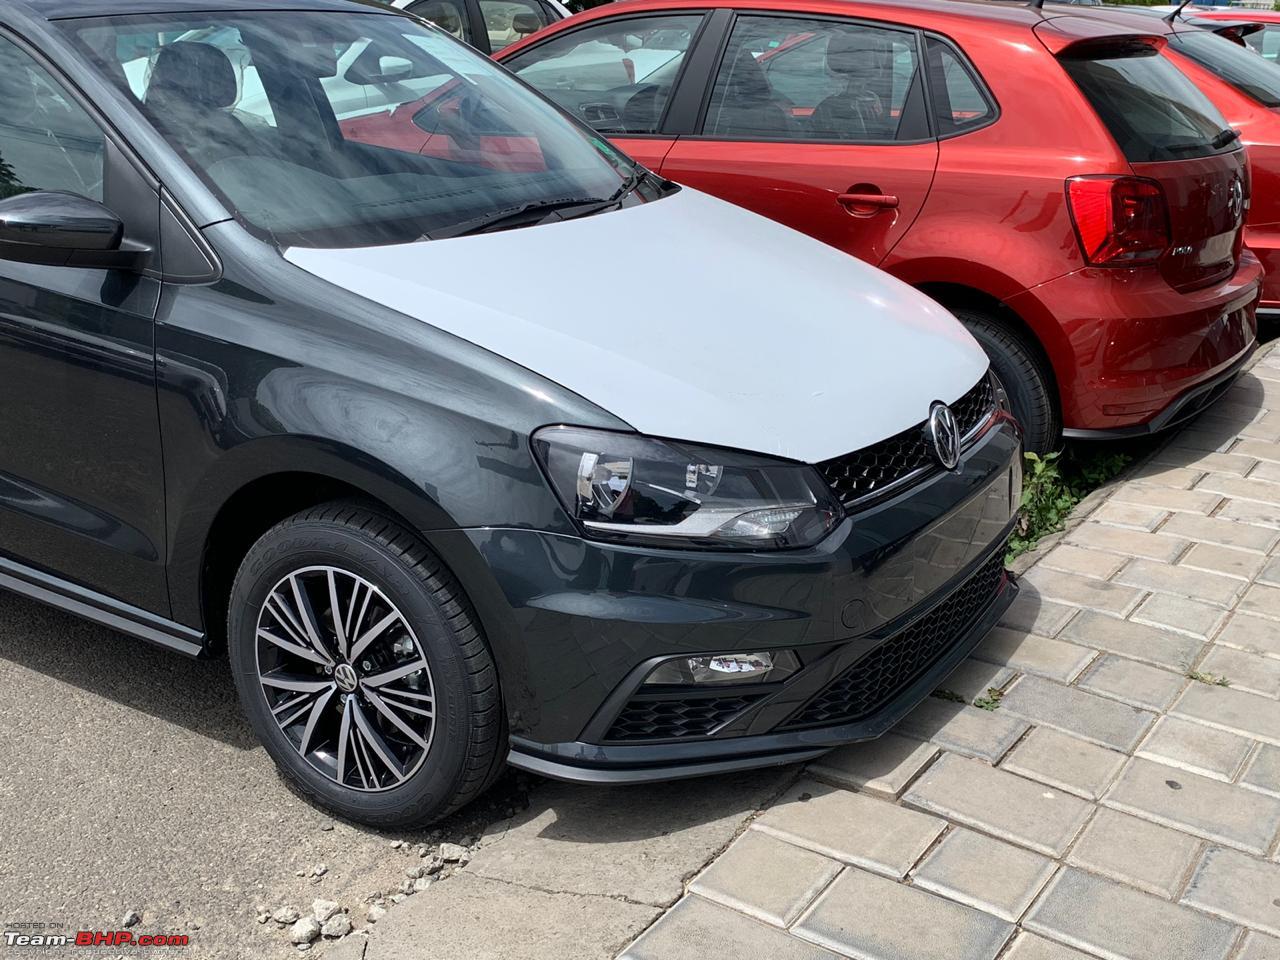 The 2019 VW Polo and Vento facelifts, now launched - Page 8 - Team-BHP